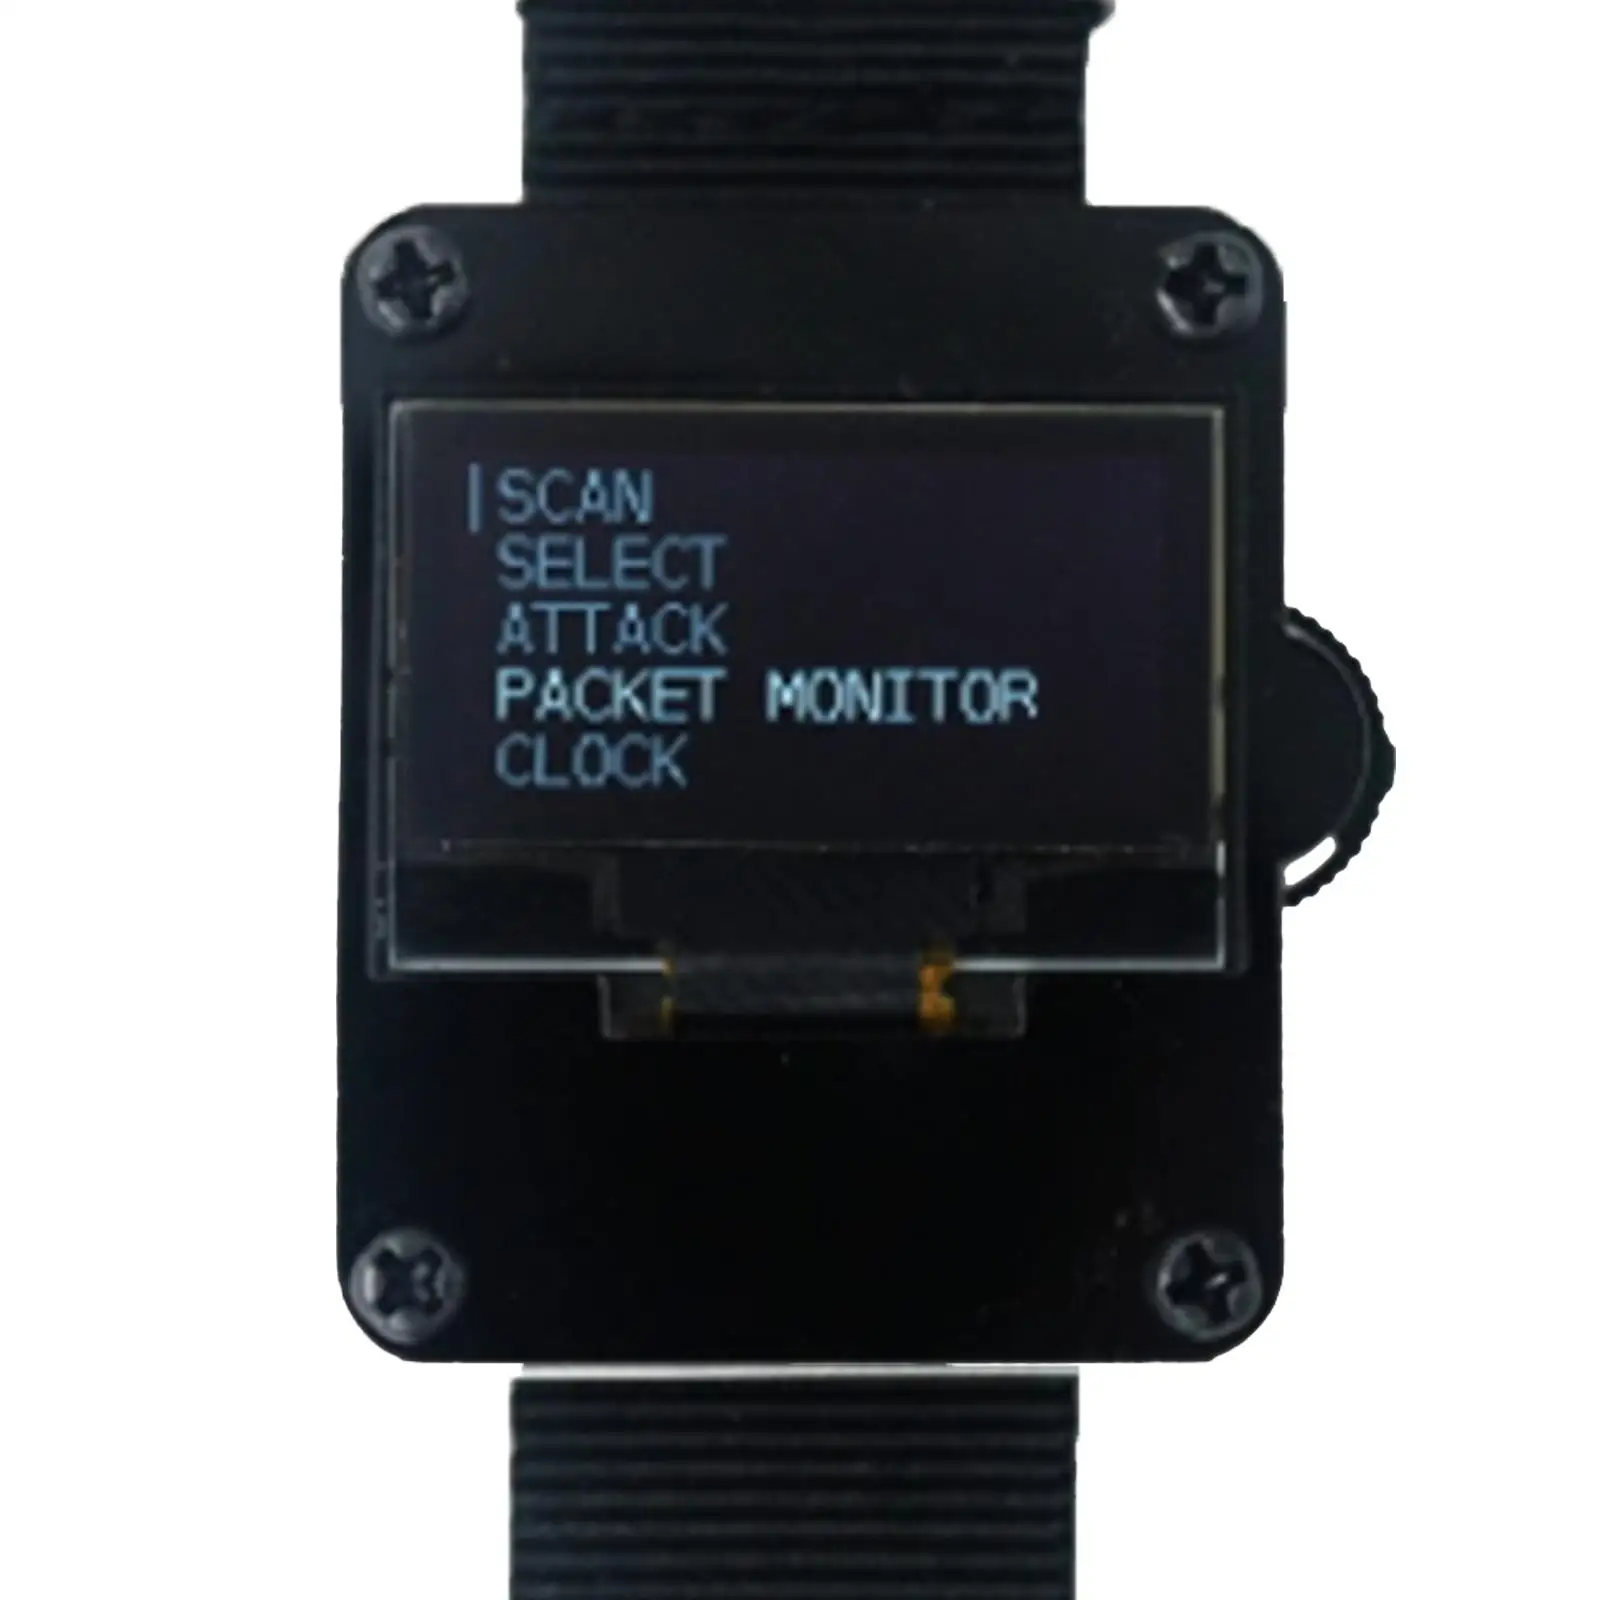 Deauther WiFi Watch Integrated Deauther WiFi Watch to Wear As A Smartwatch